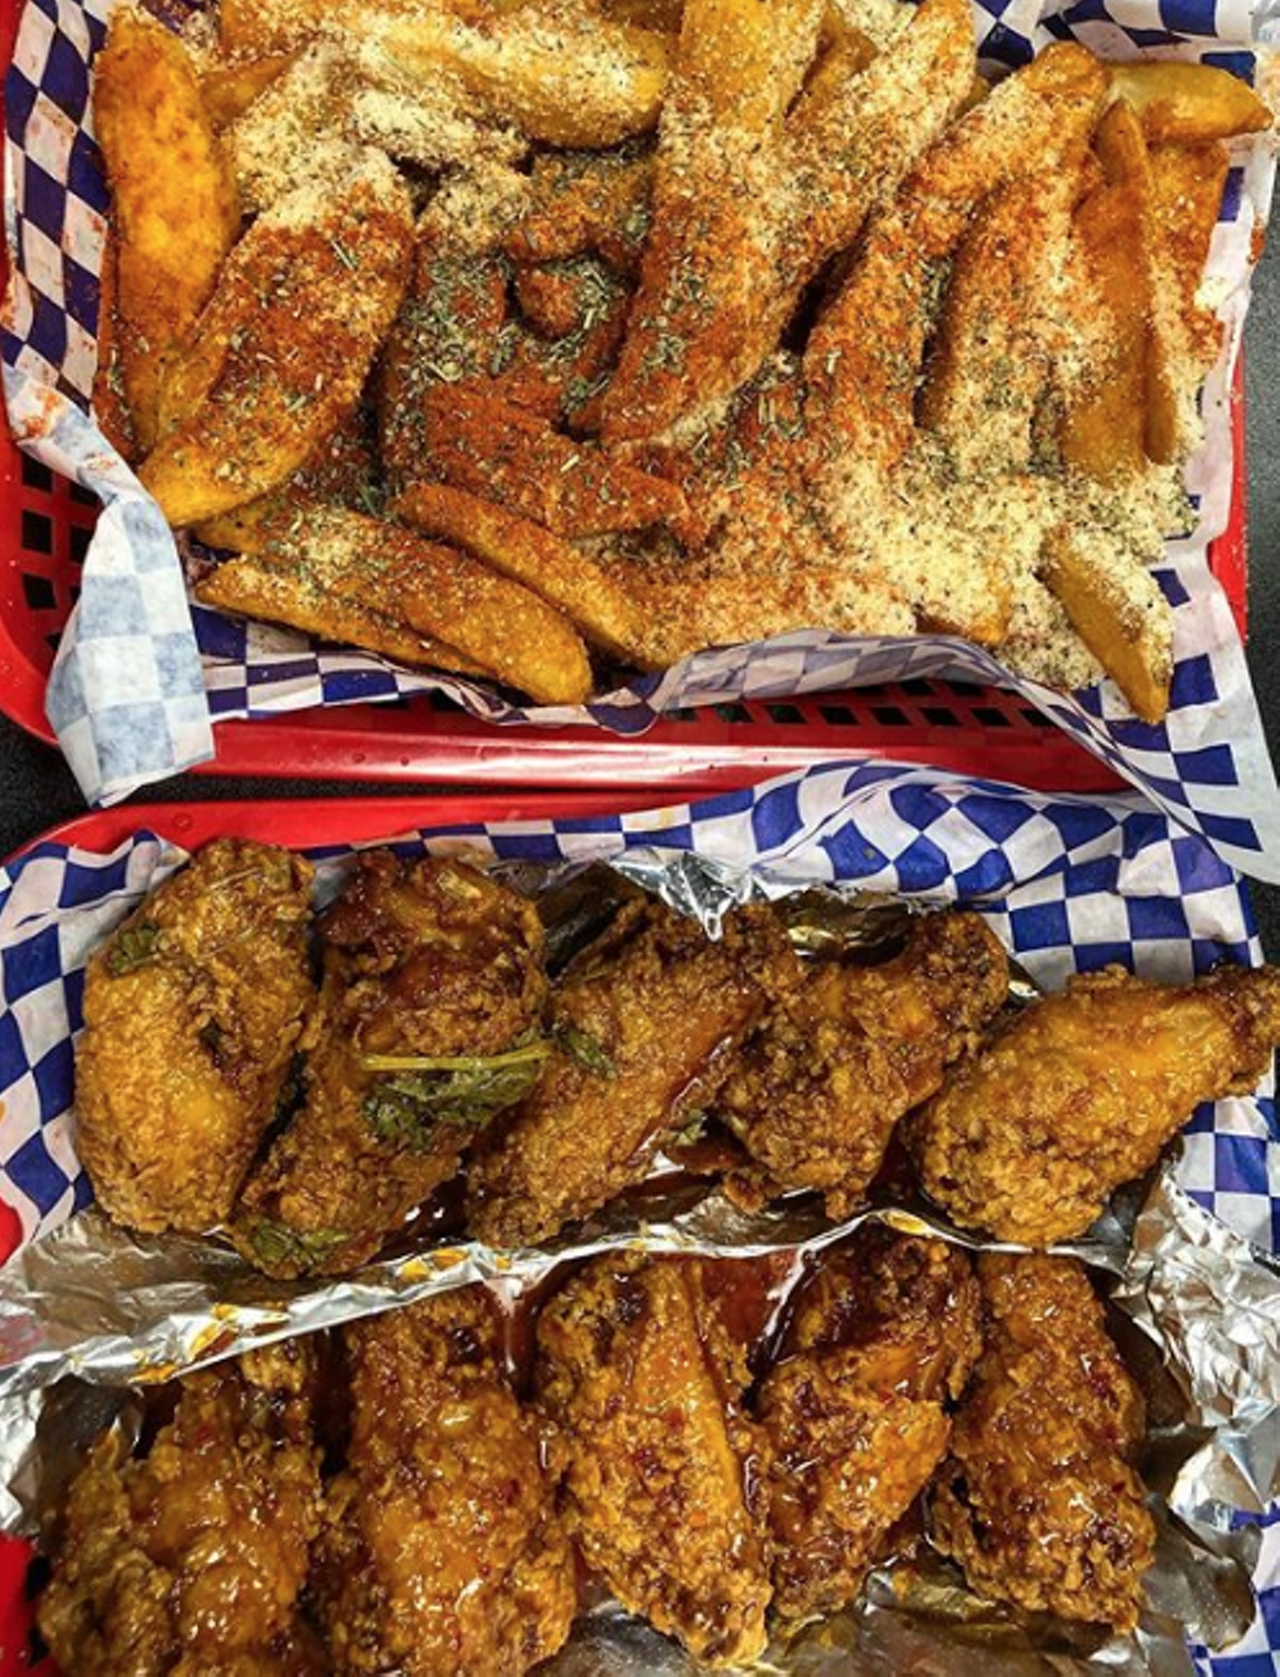 Wayne’s Wings
4453 Walzem Road, (210) 300-3891, wayneswingssa.com
Wayne’s Wings offers a variety of original flavors and dry rub options like the spicy ghost pepper-filled “Creeper” wings, and sweeter bites like the funnel cake wings. 
Photo via Instagram / stxfoodie